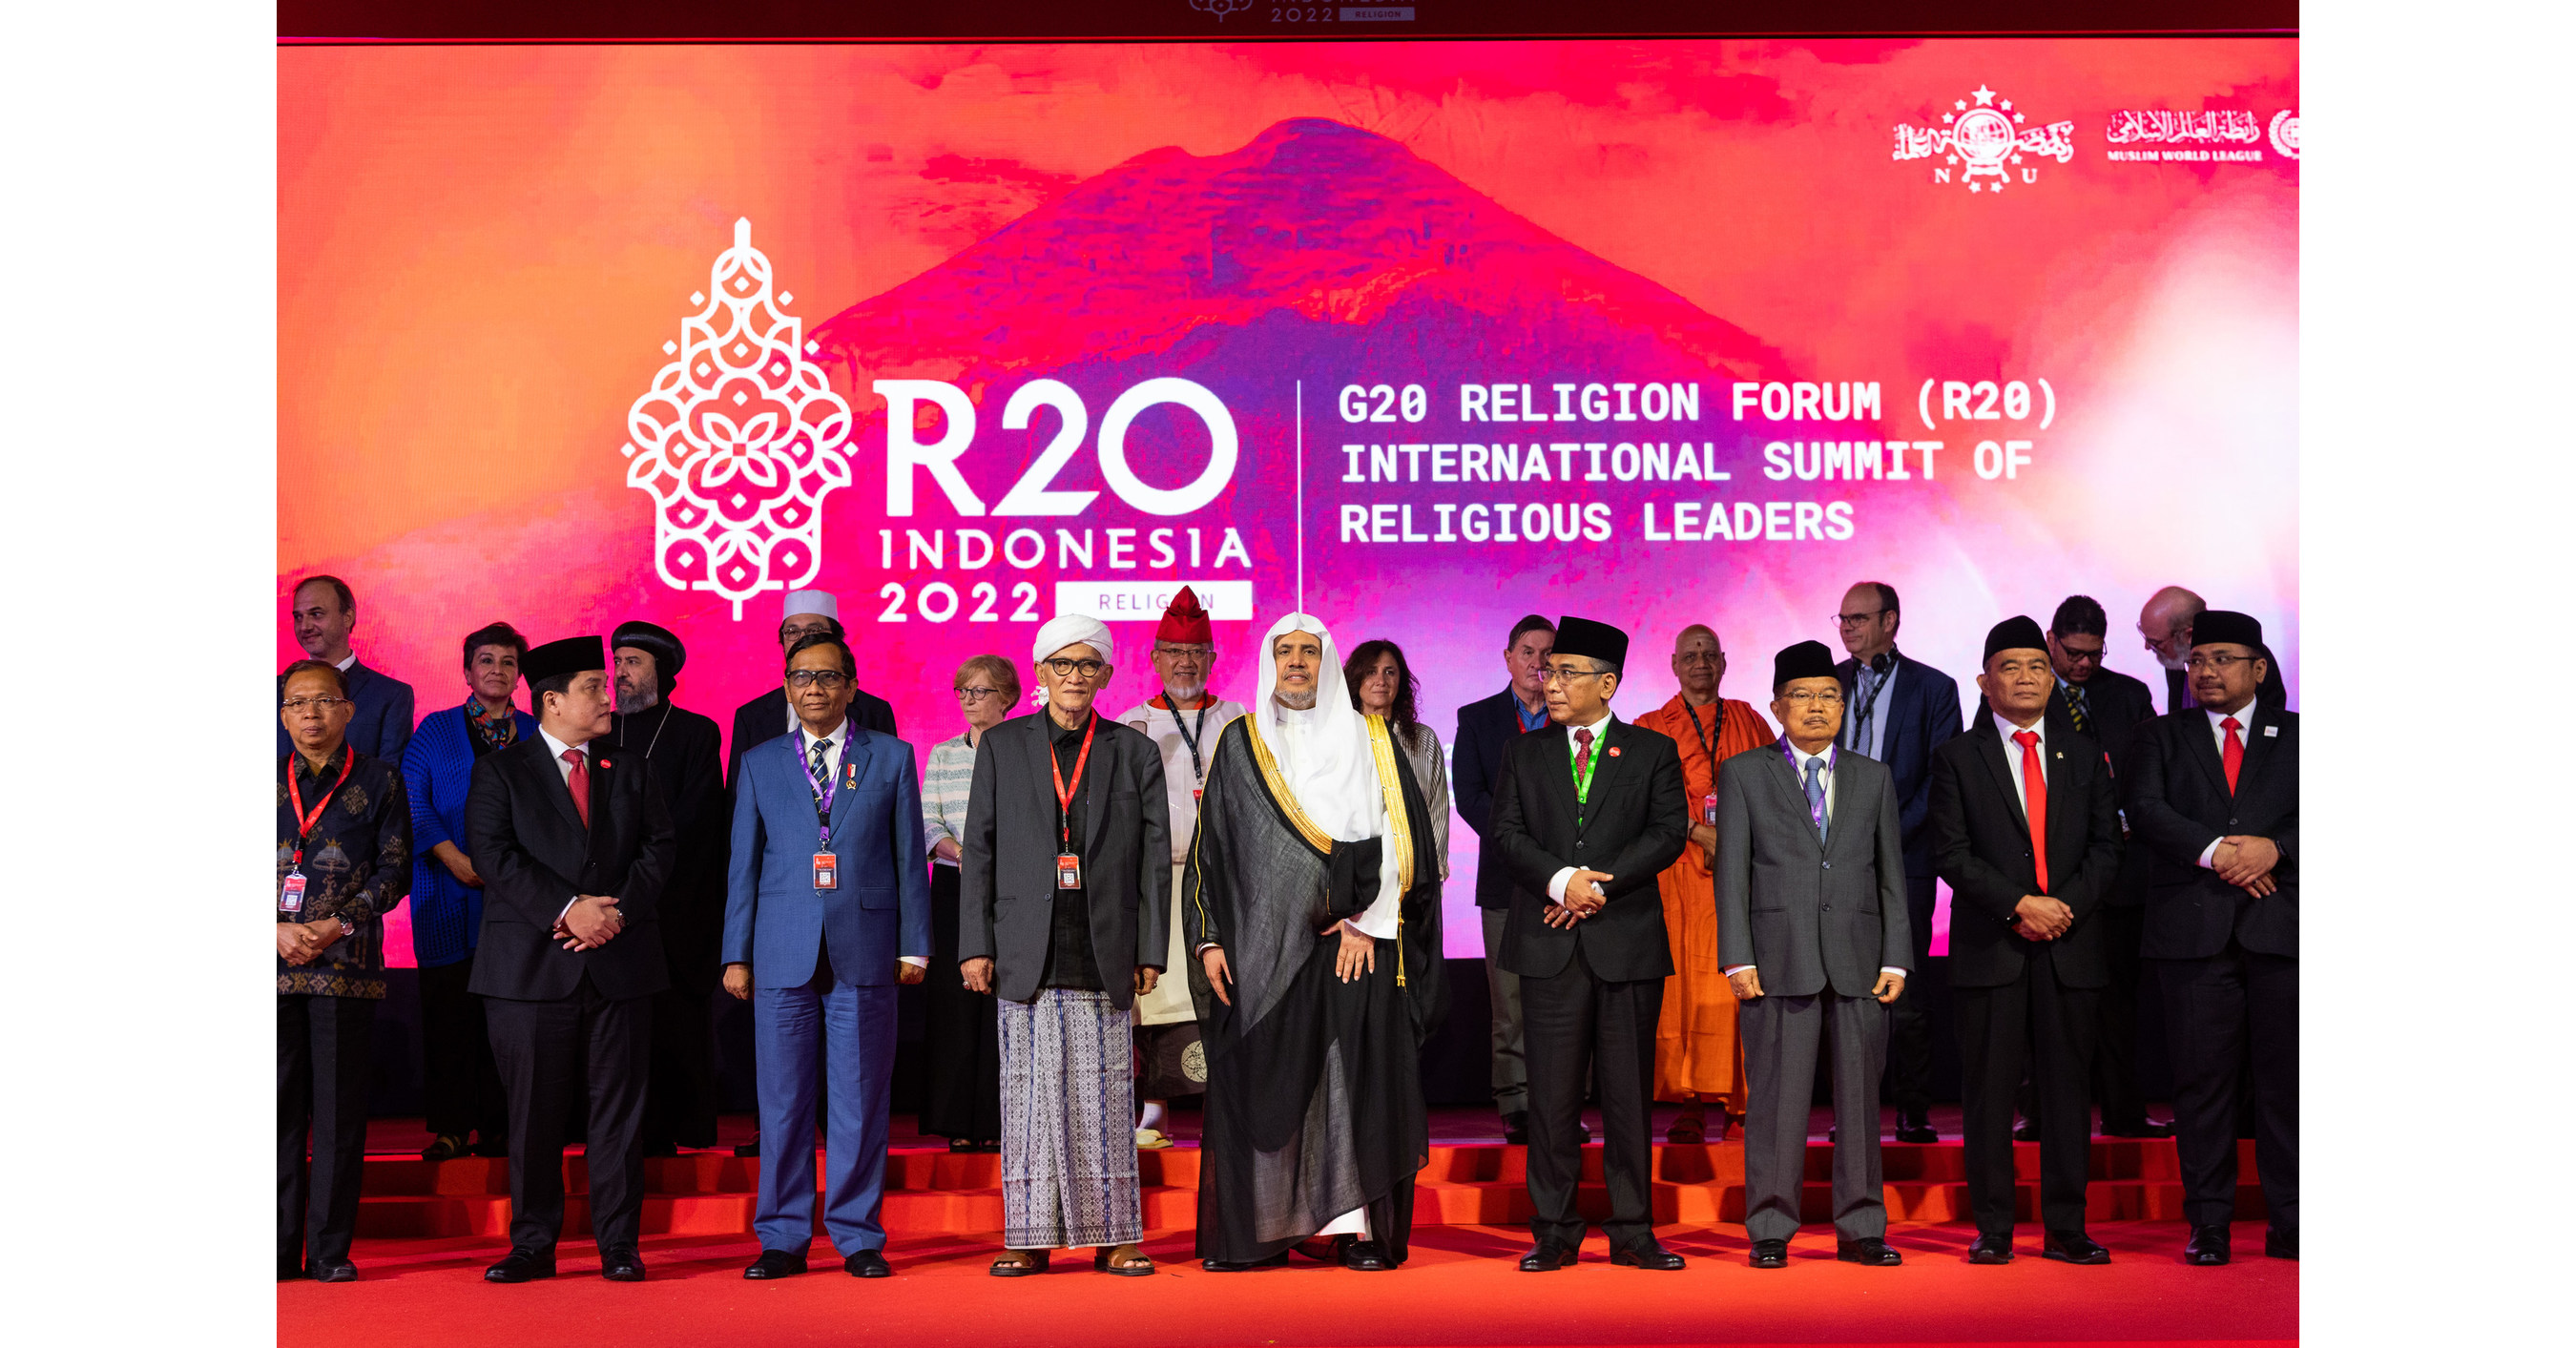 muslim-world-league-at-first-g20-religious-forum-r20-faith-leaders-call-for-global-alliance-of-religious-social-and-amp-political-leaders-to-tackle-global-crises